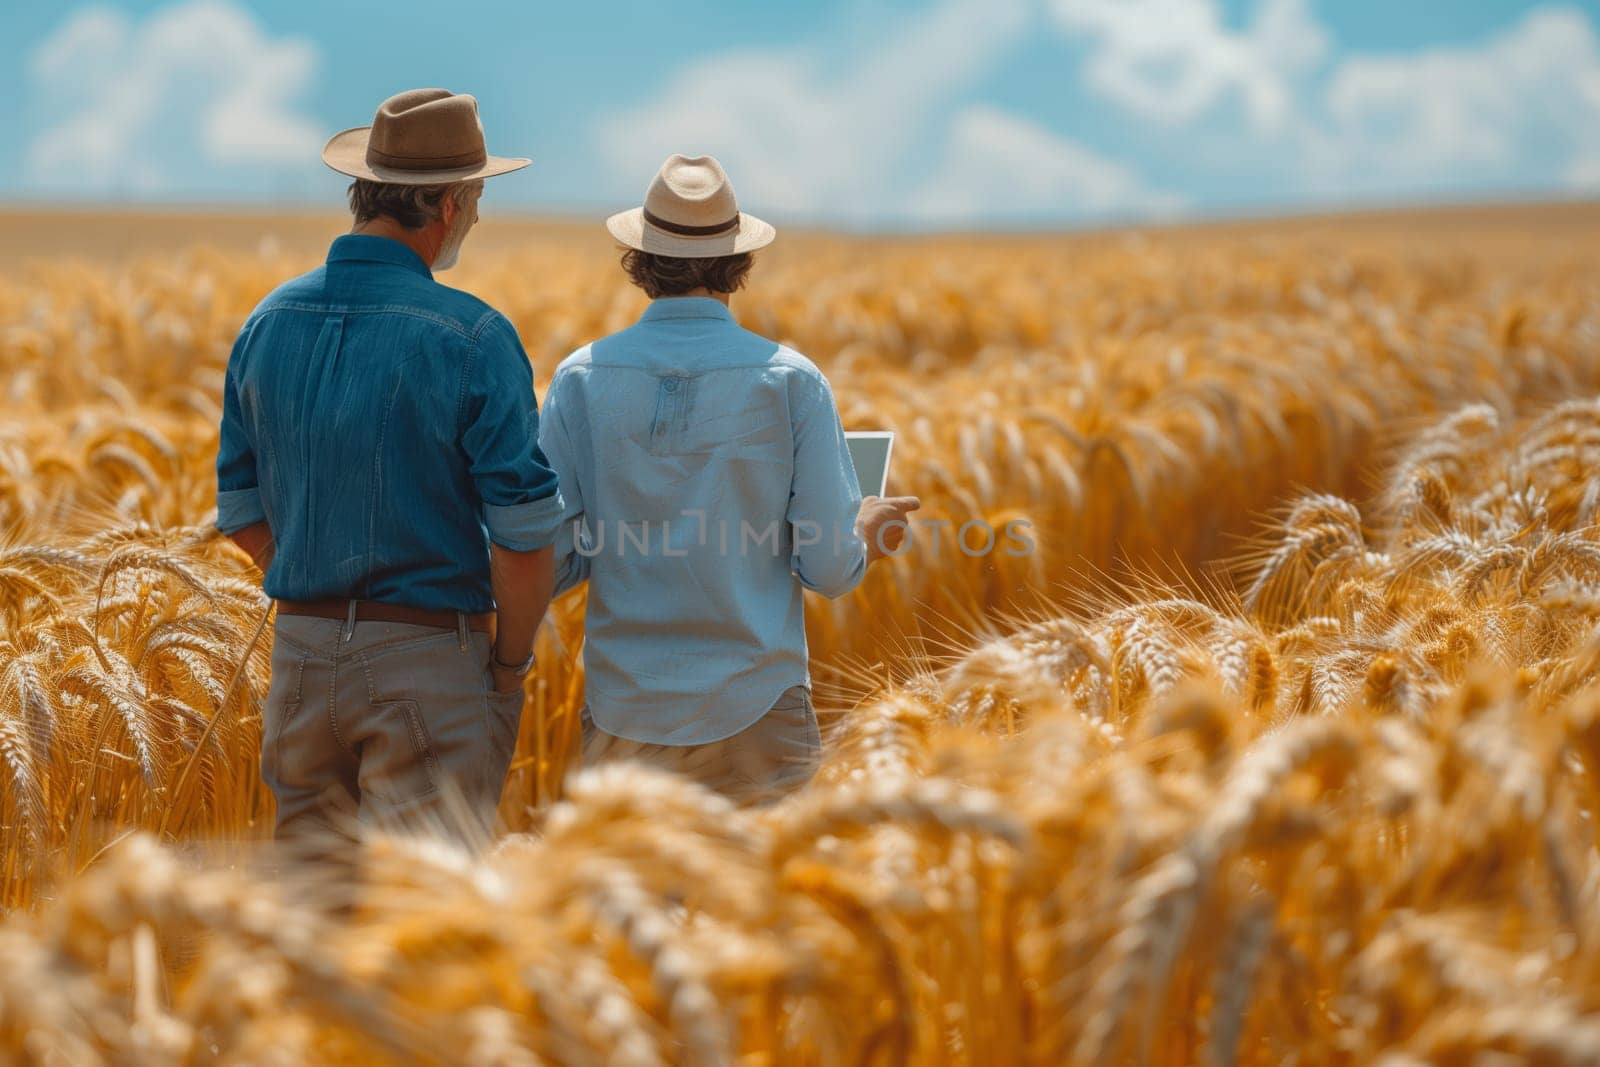 Two men standing in wheat field, admiring tablet under the cloudy sky by richwolf